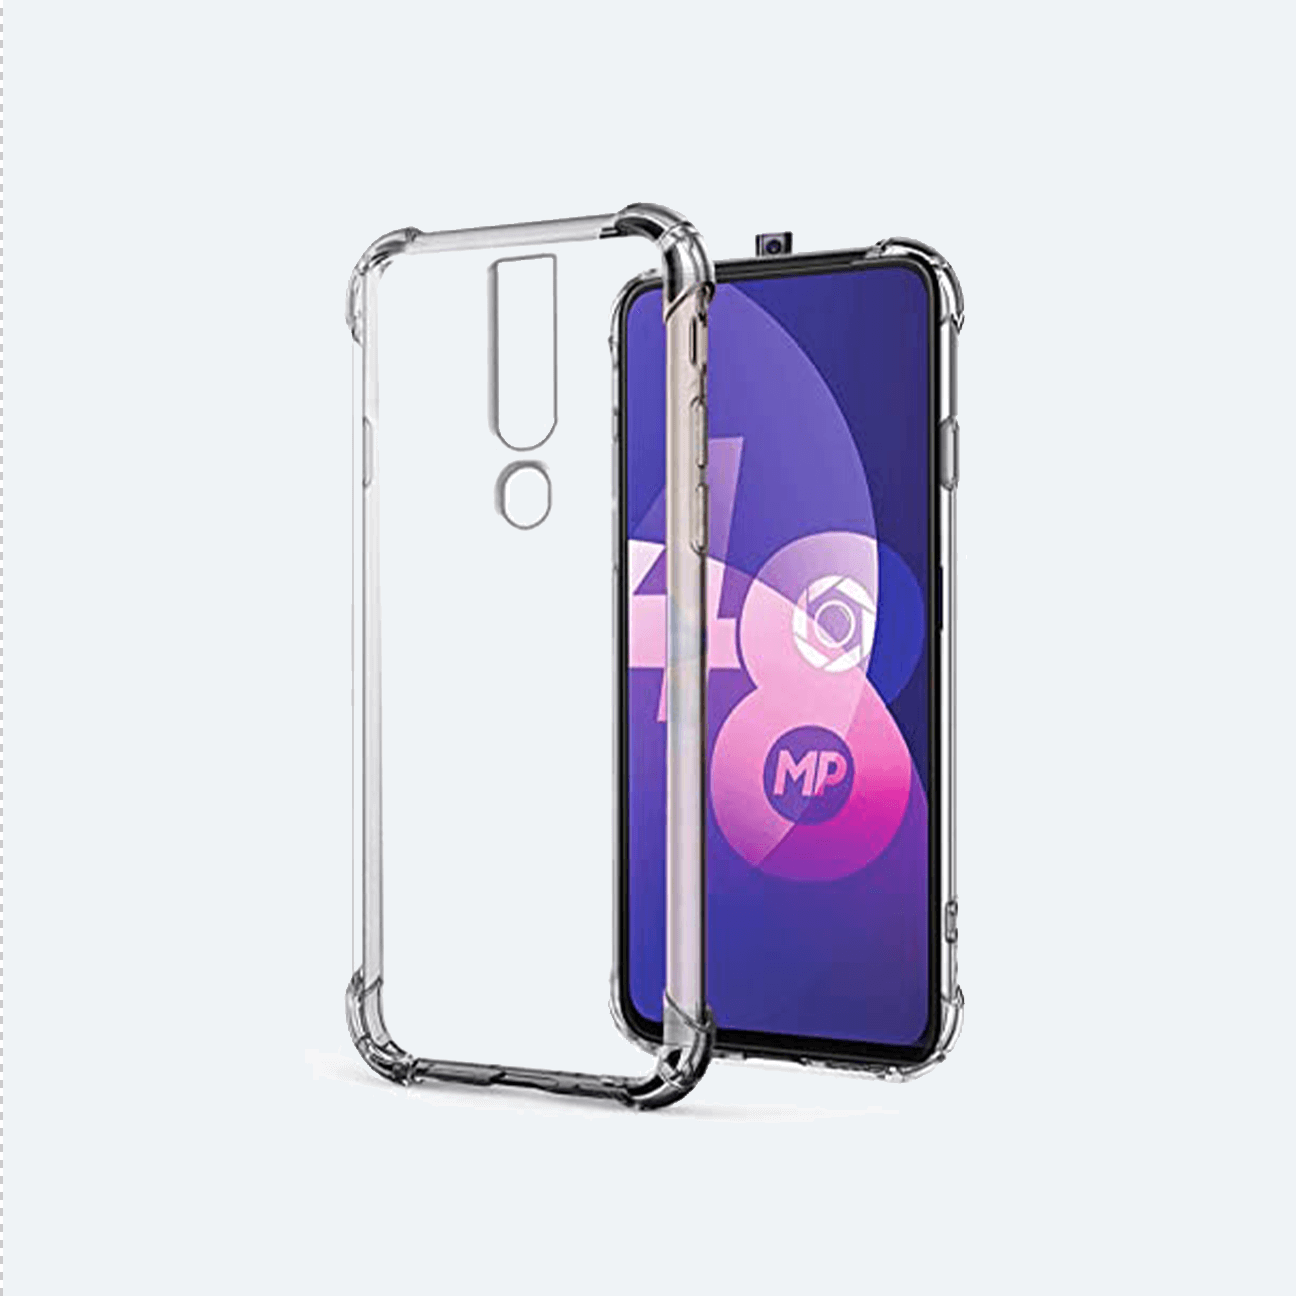 Oppo F11 Pro Transparent Back Cover